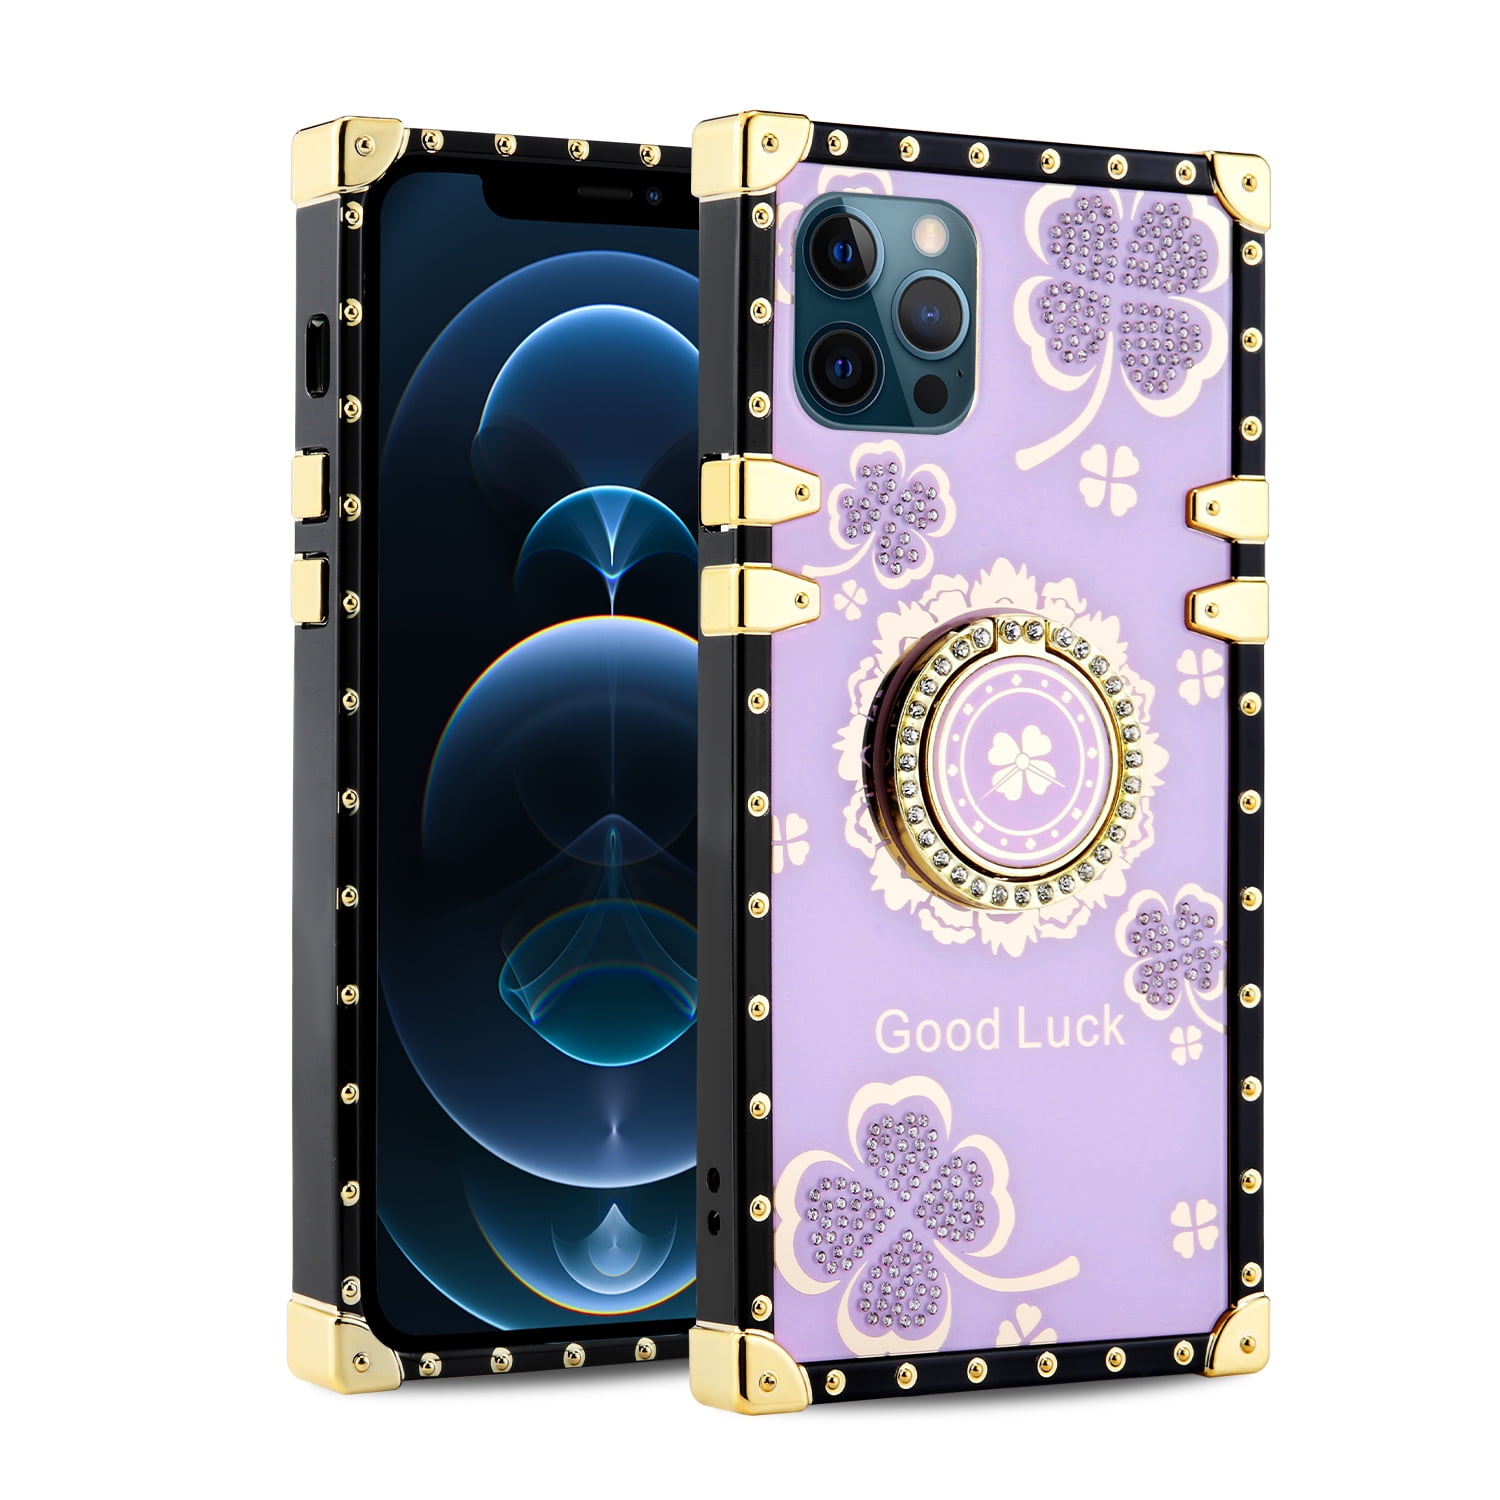 Purple iPhone 12 Pro Case Wallet Design Silicone iPhone 12 Case for Women Men with Card Holder Sleeve & Diamond Finger Ring Grip Soft Slim Protective Phone Case for iPhone 12/12 Pro 6.1 Inch 